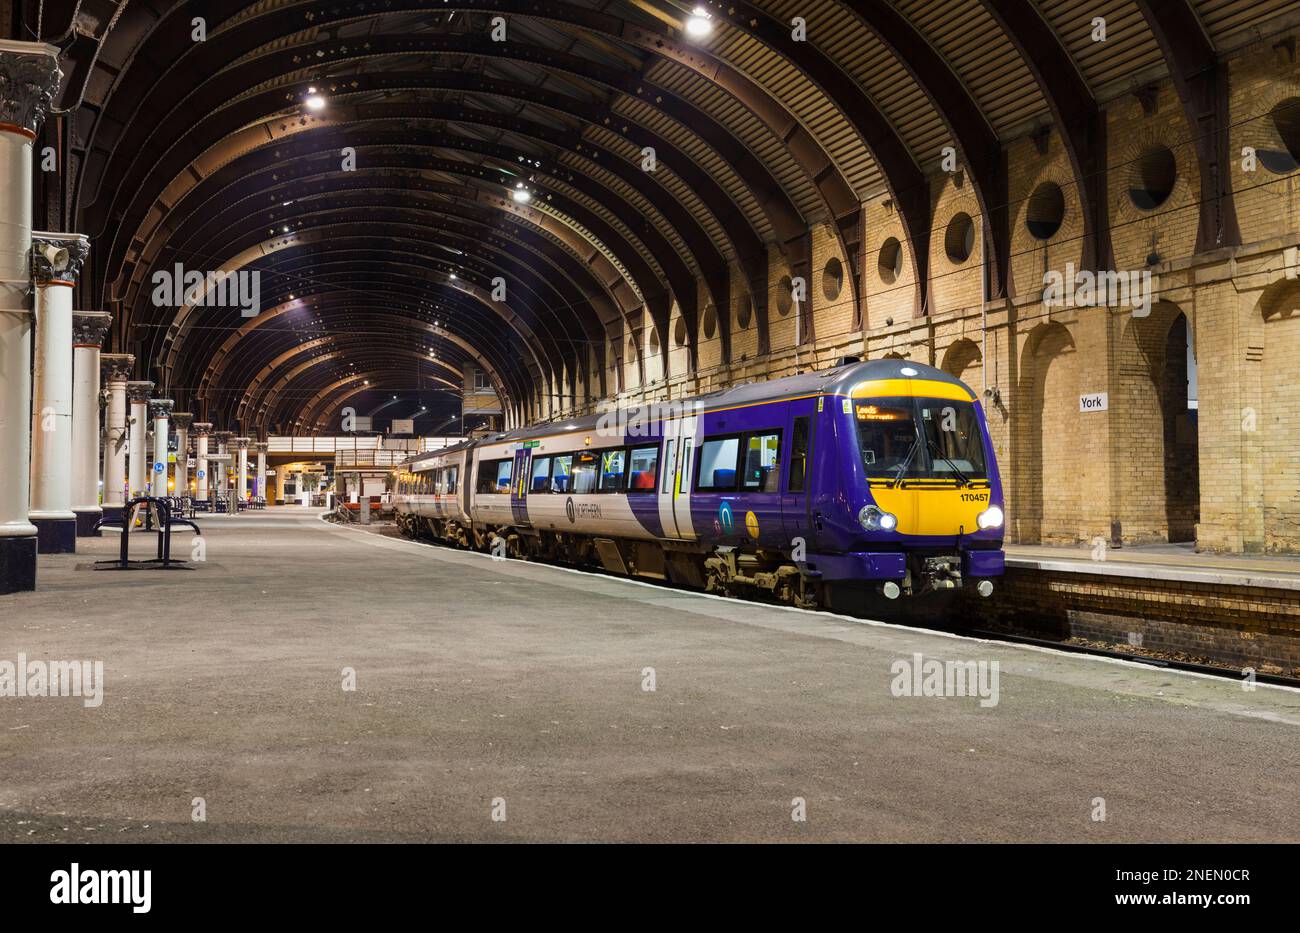 Northern Rail class 170 Turbostar train under the trainshed roof at York railway station on the east coast mainline Stock Photo